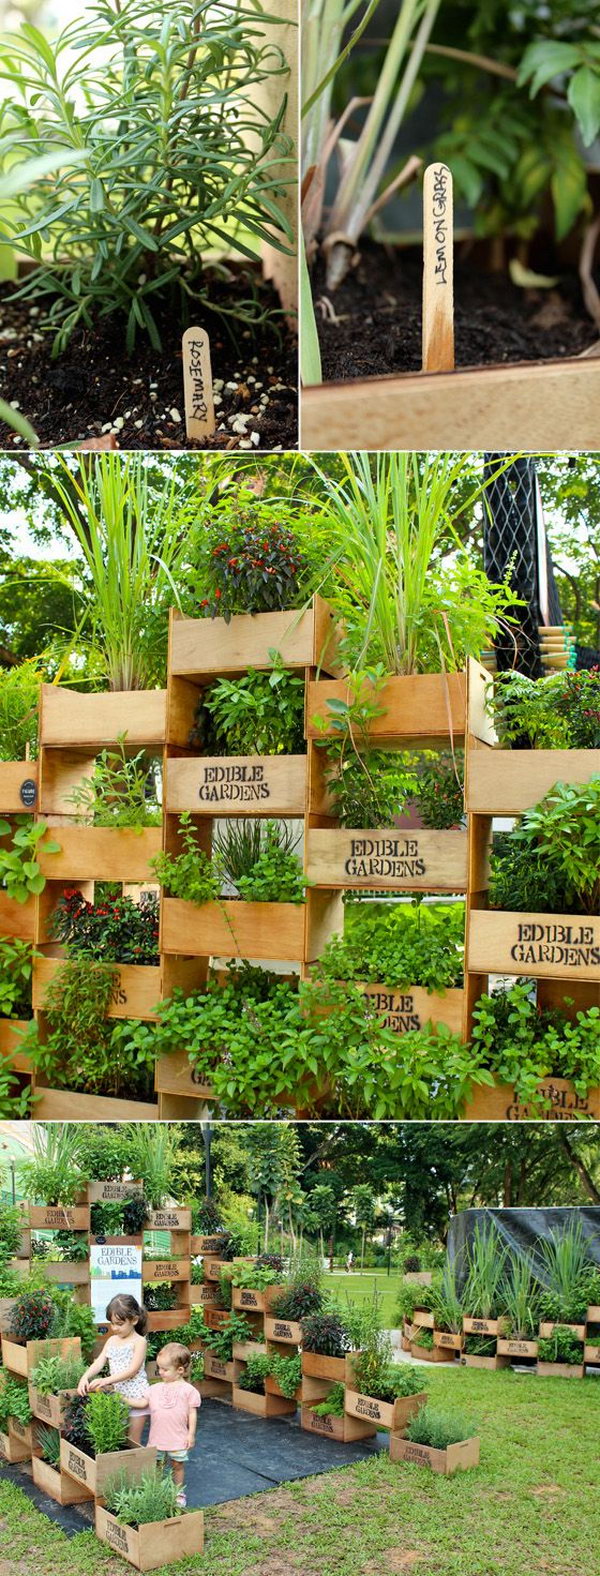 Vertical garden from old crates. It allows plants to extend upward rather than grow along the surface of the garden. Doesn’t take a lot of space and look so beautiful at the same time.